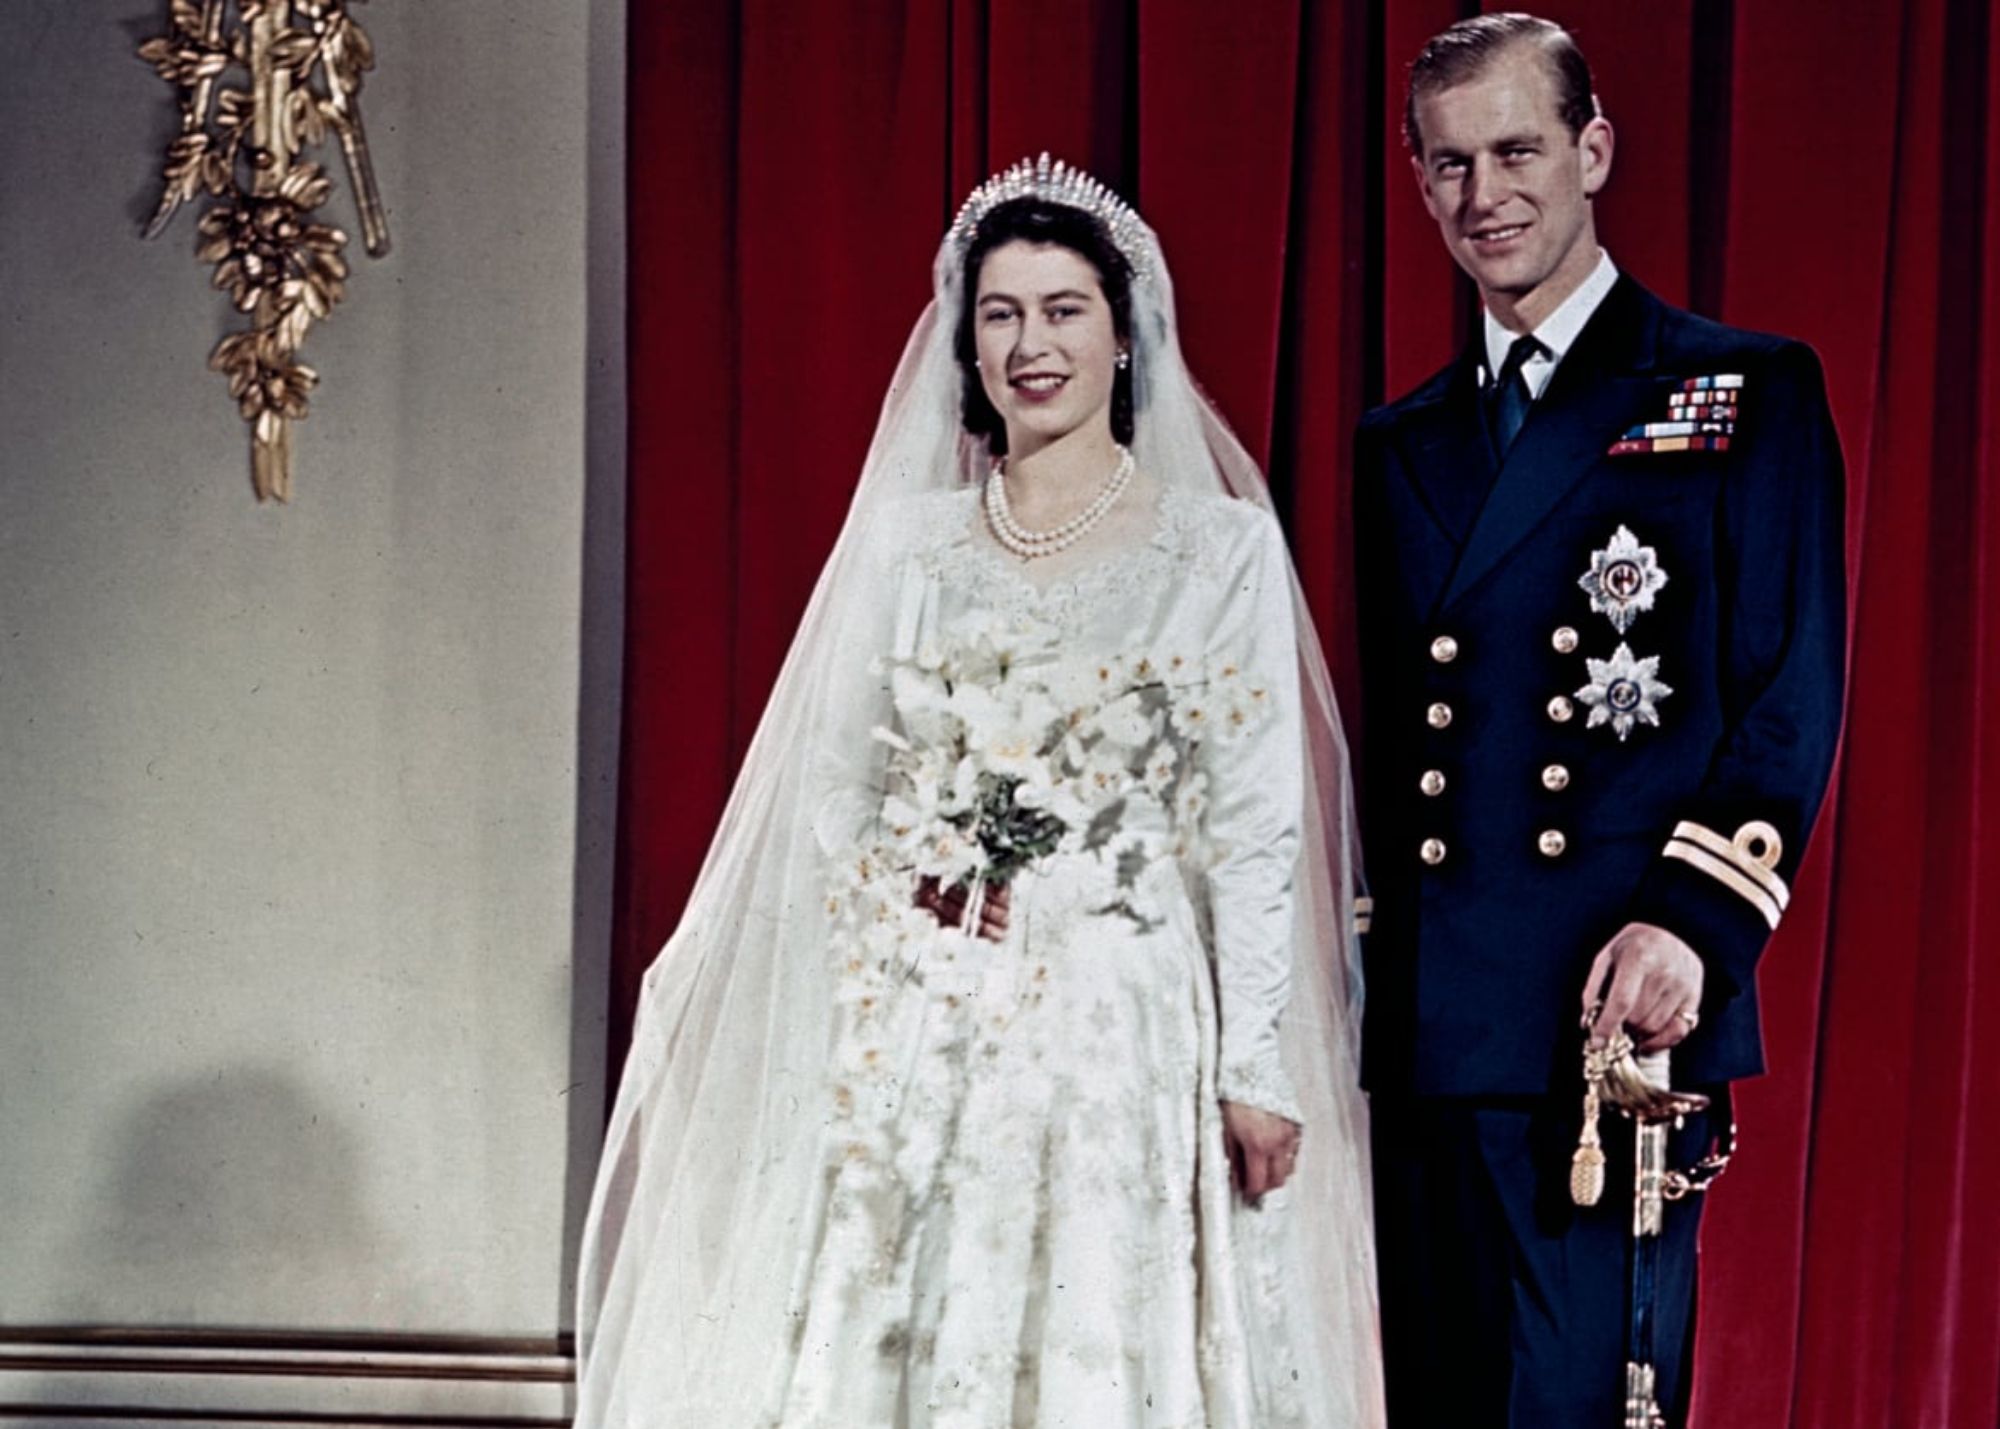 Queen Elizabeth II is wearing a white wedding dress, and Prince Philip is in full military uniform